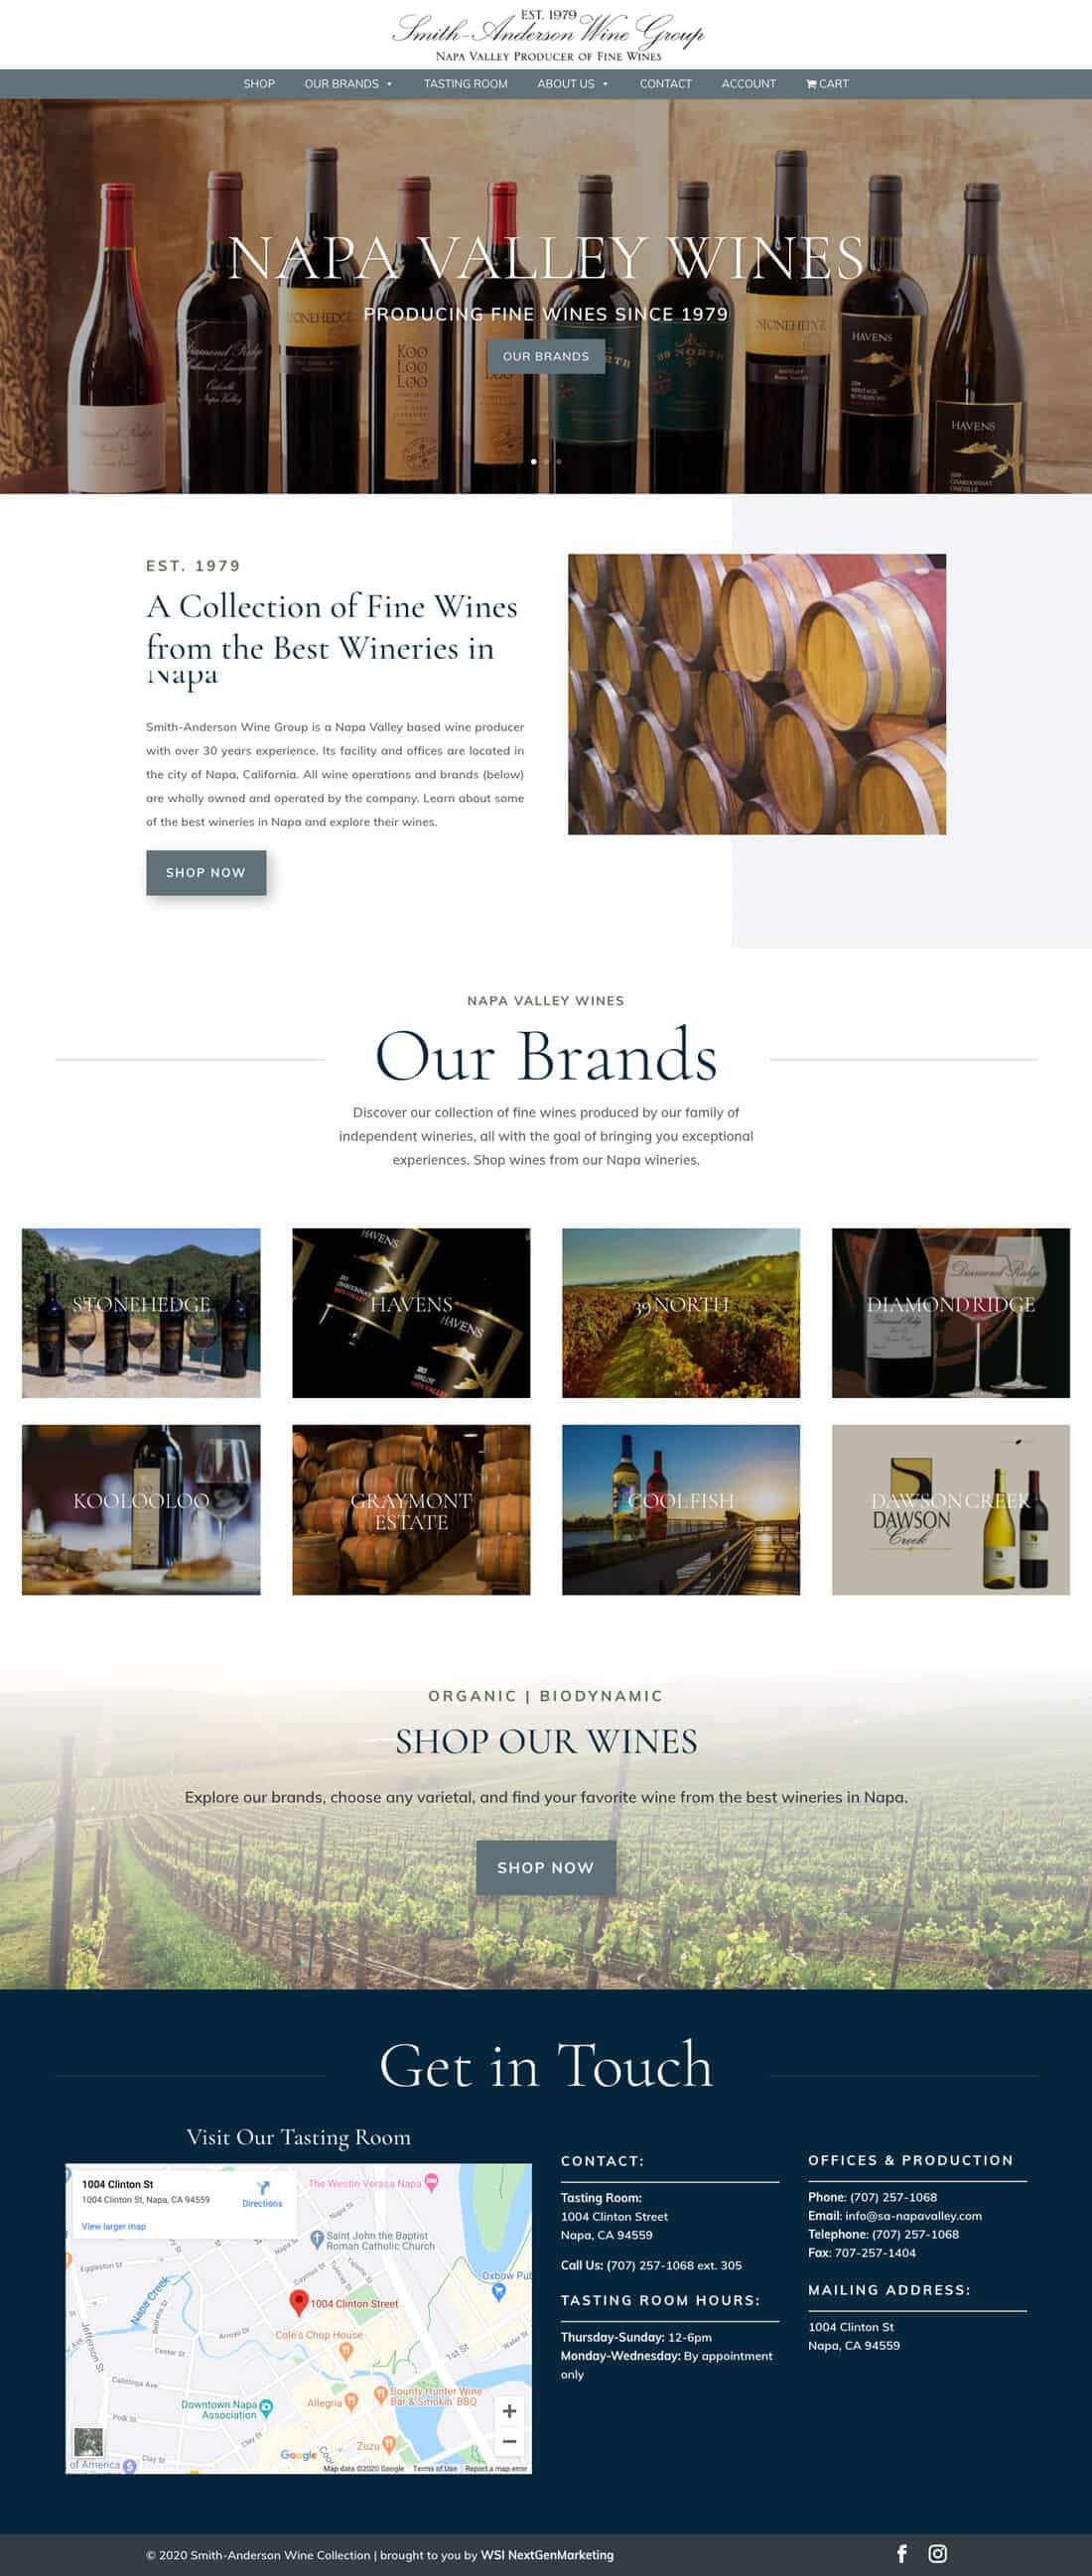 smith-anderson-winery-website-vinespring-hp